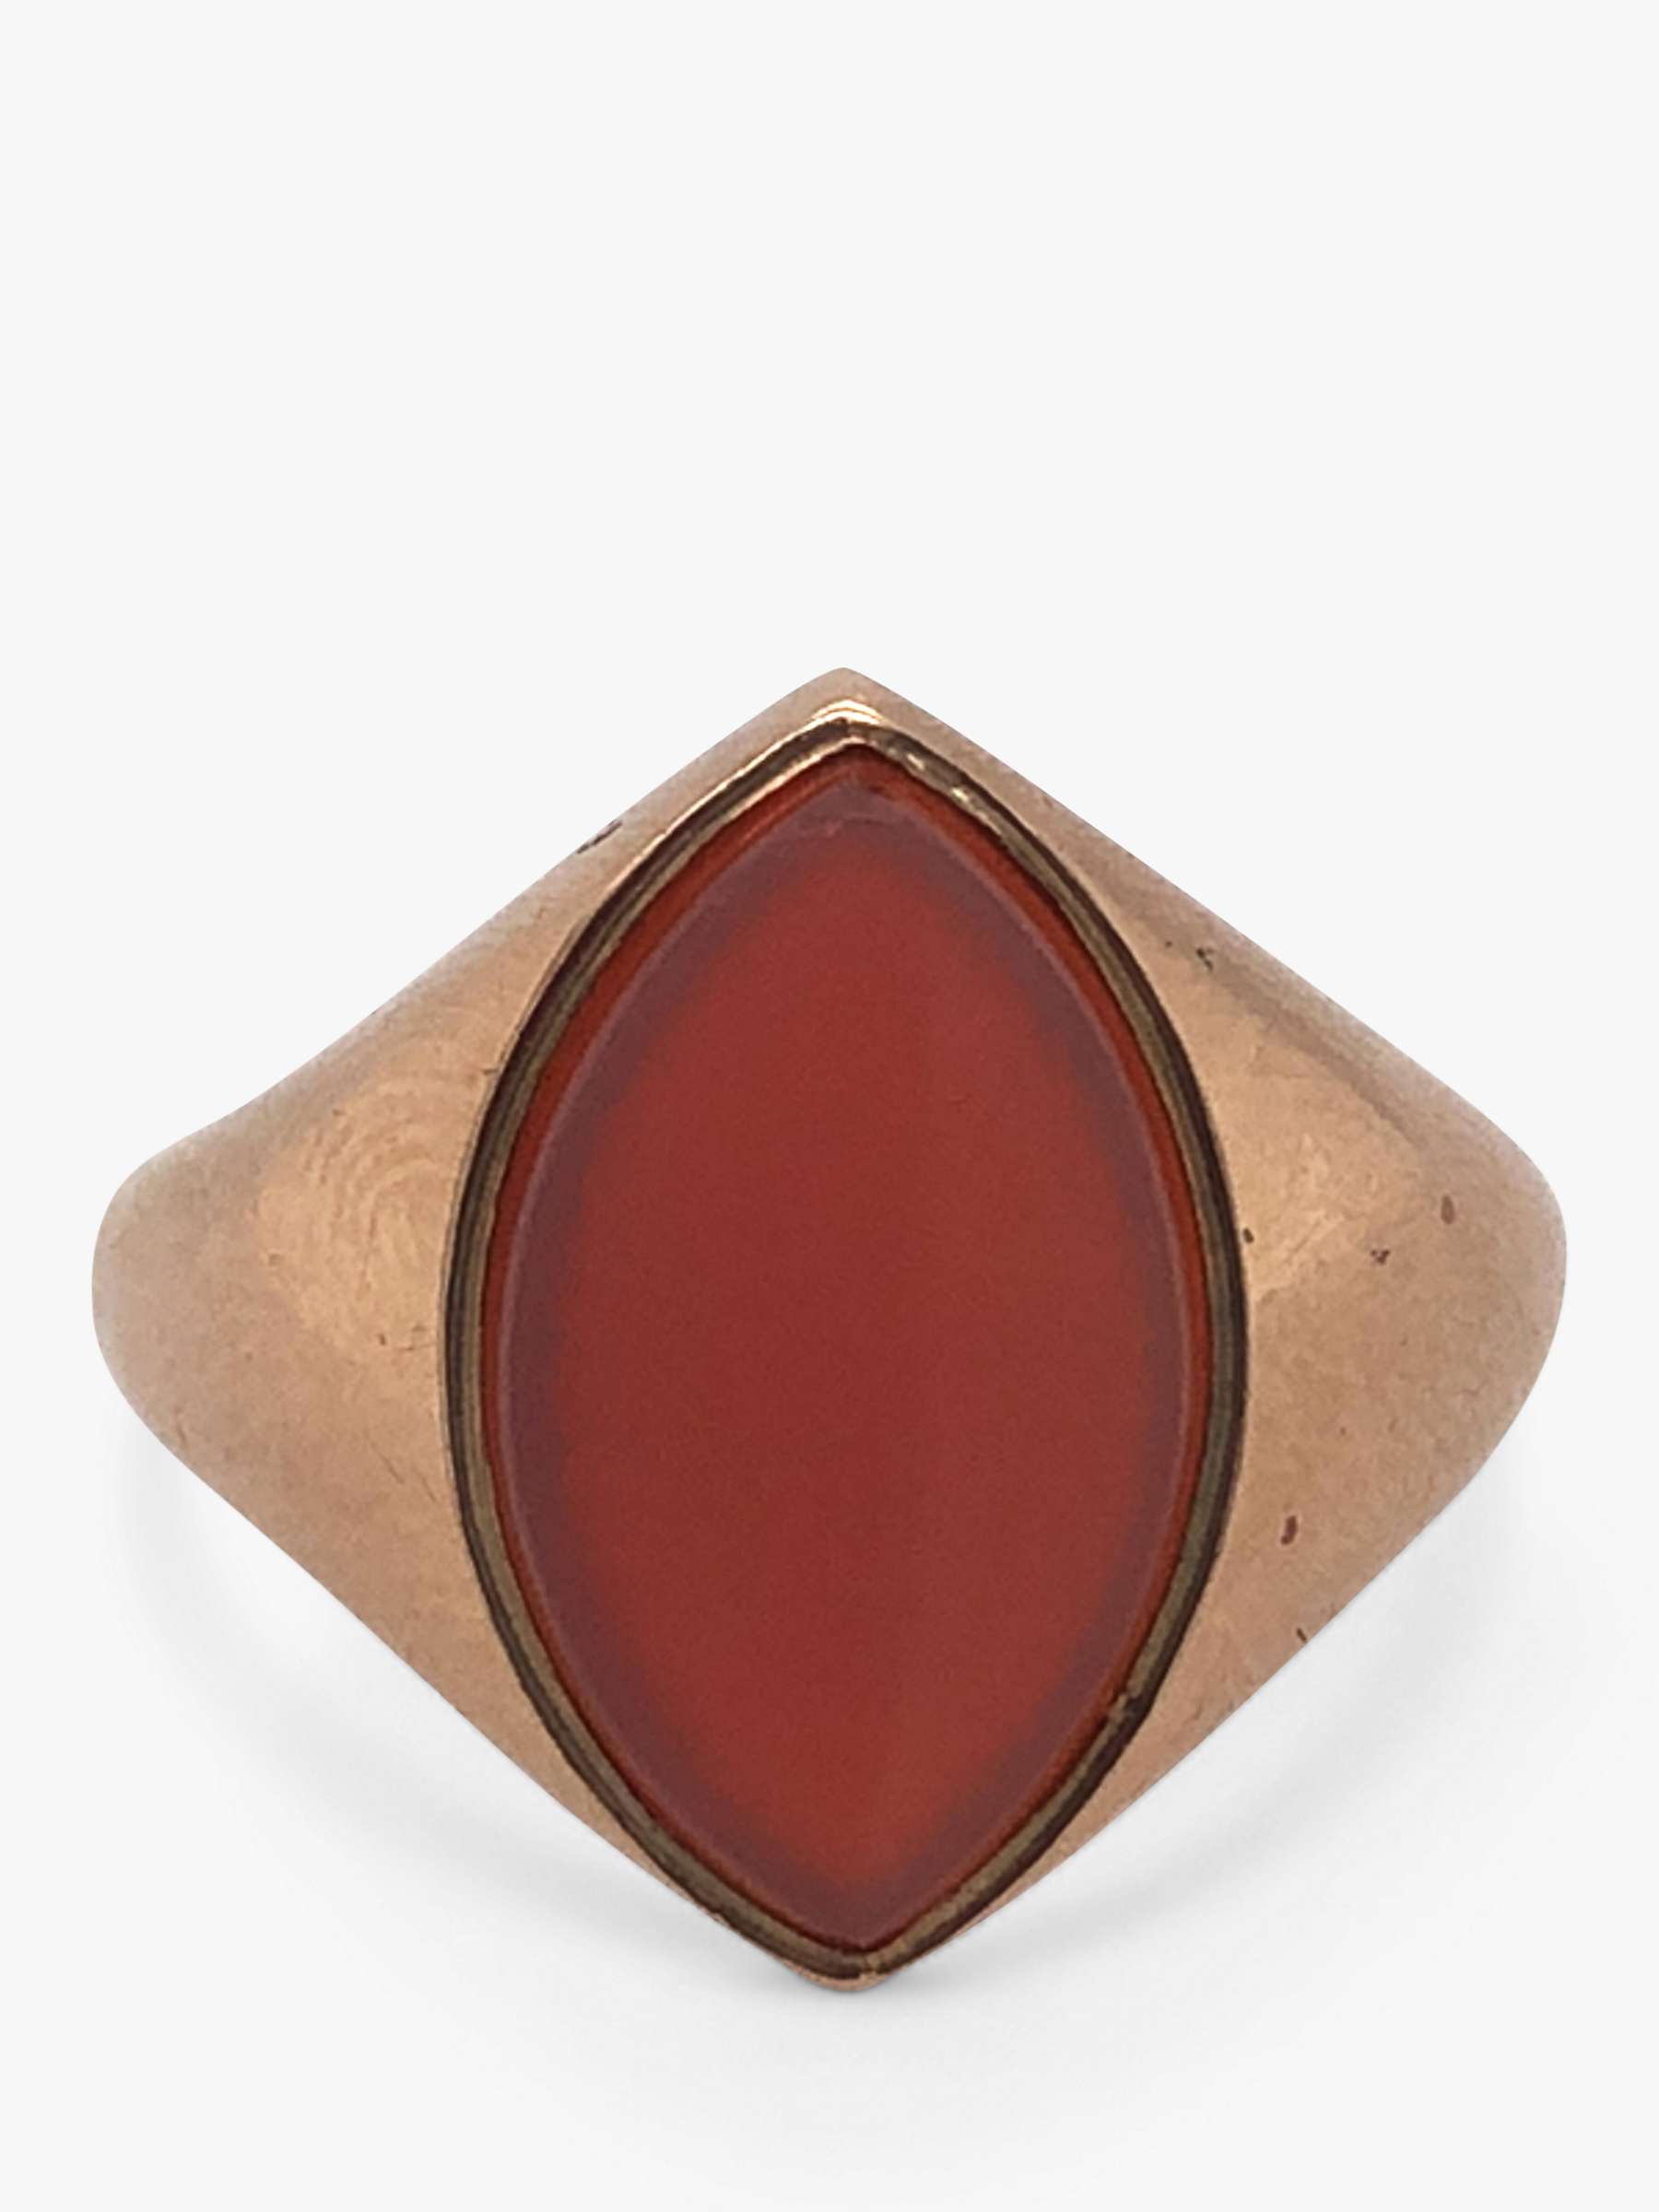 Buy Vintage Fine Jewellery Second Hand Marquise Carnelian Signet Ring, Dated Birmingham 1889 Online at johnlewis.com